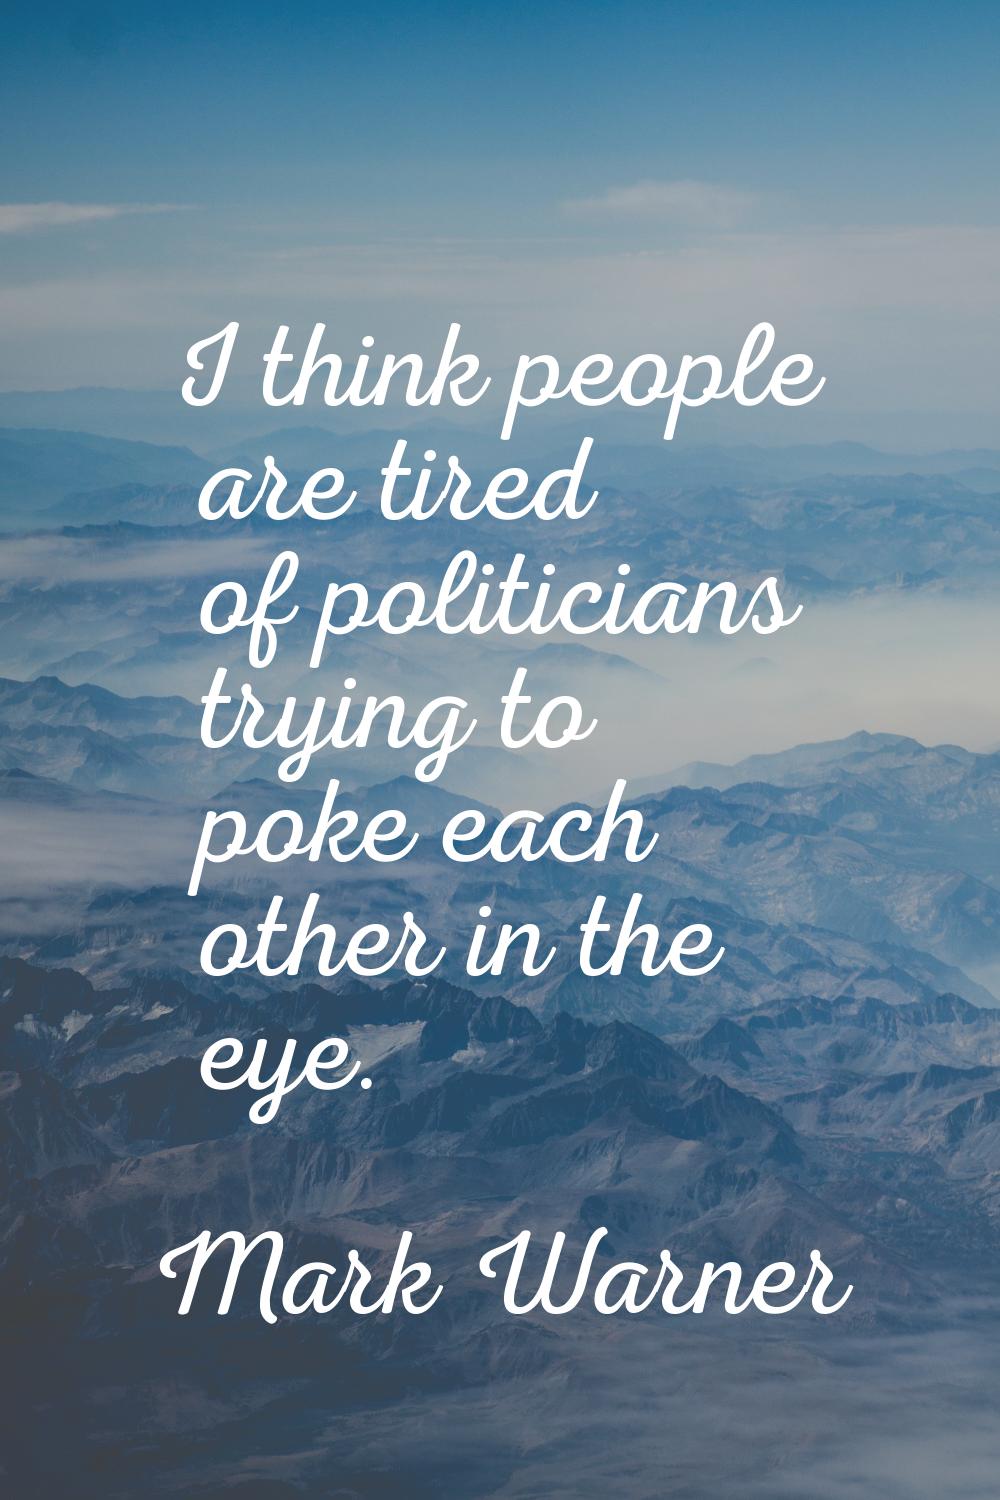 I think people are tired of politicians trying to poke each other in the eye.